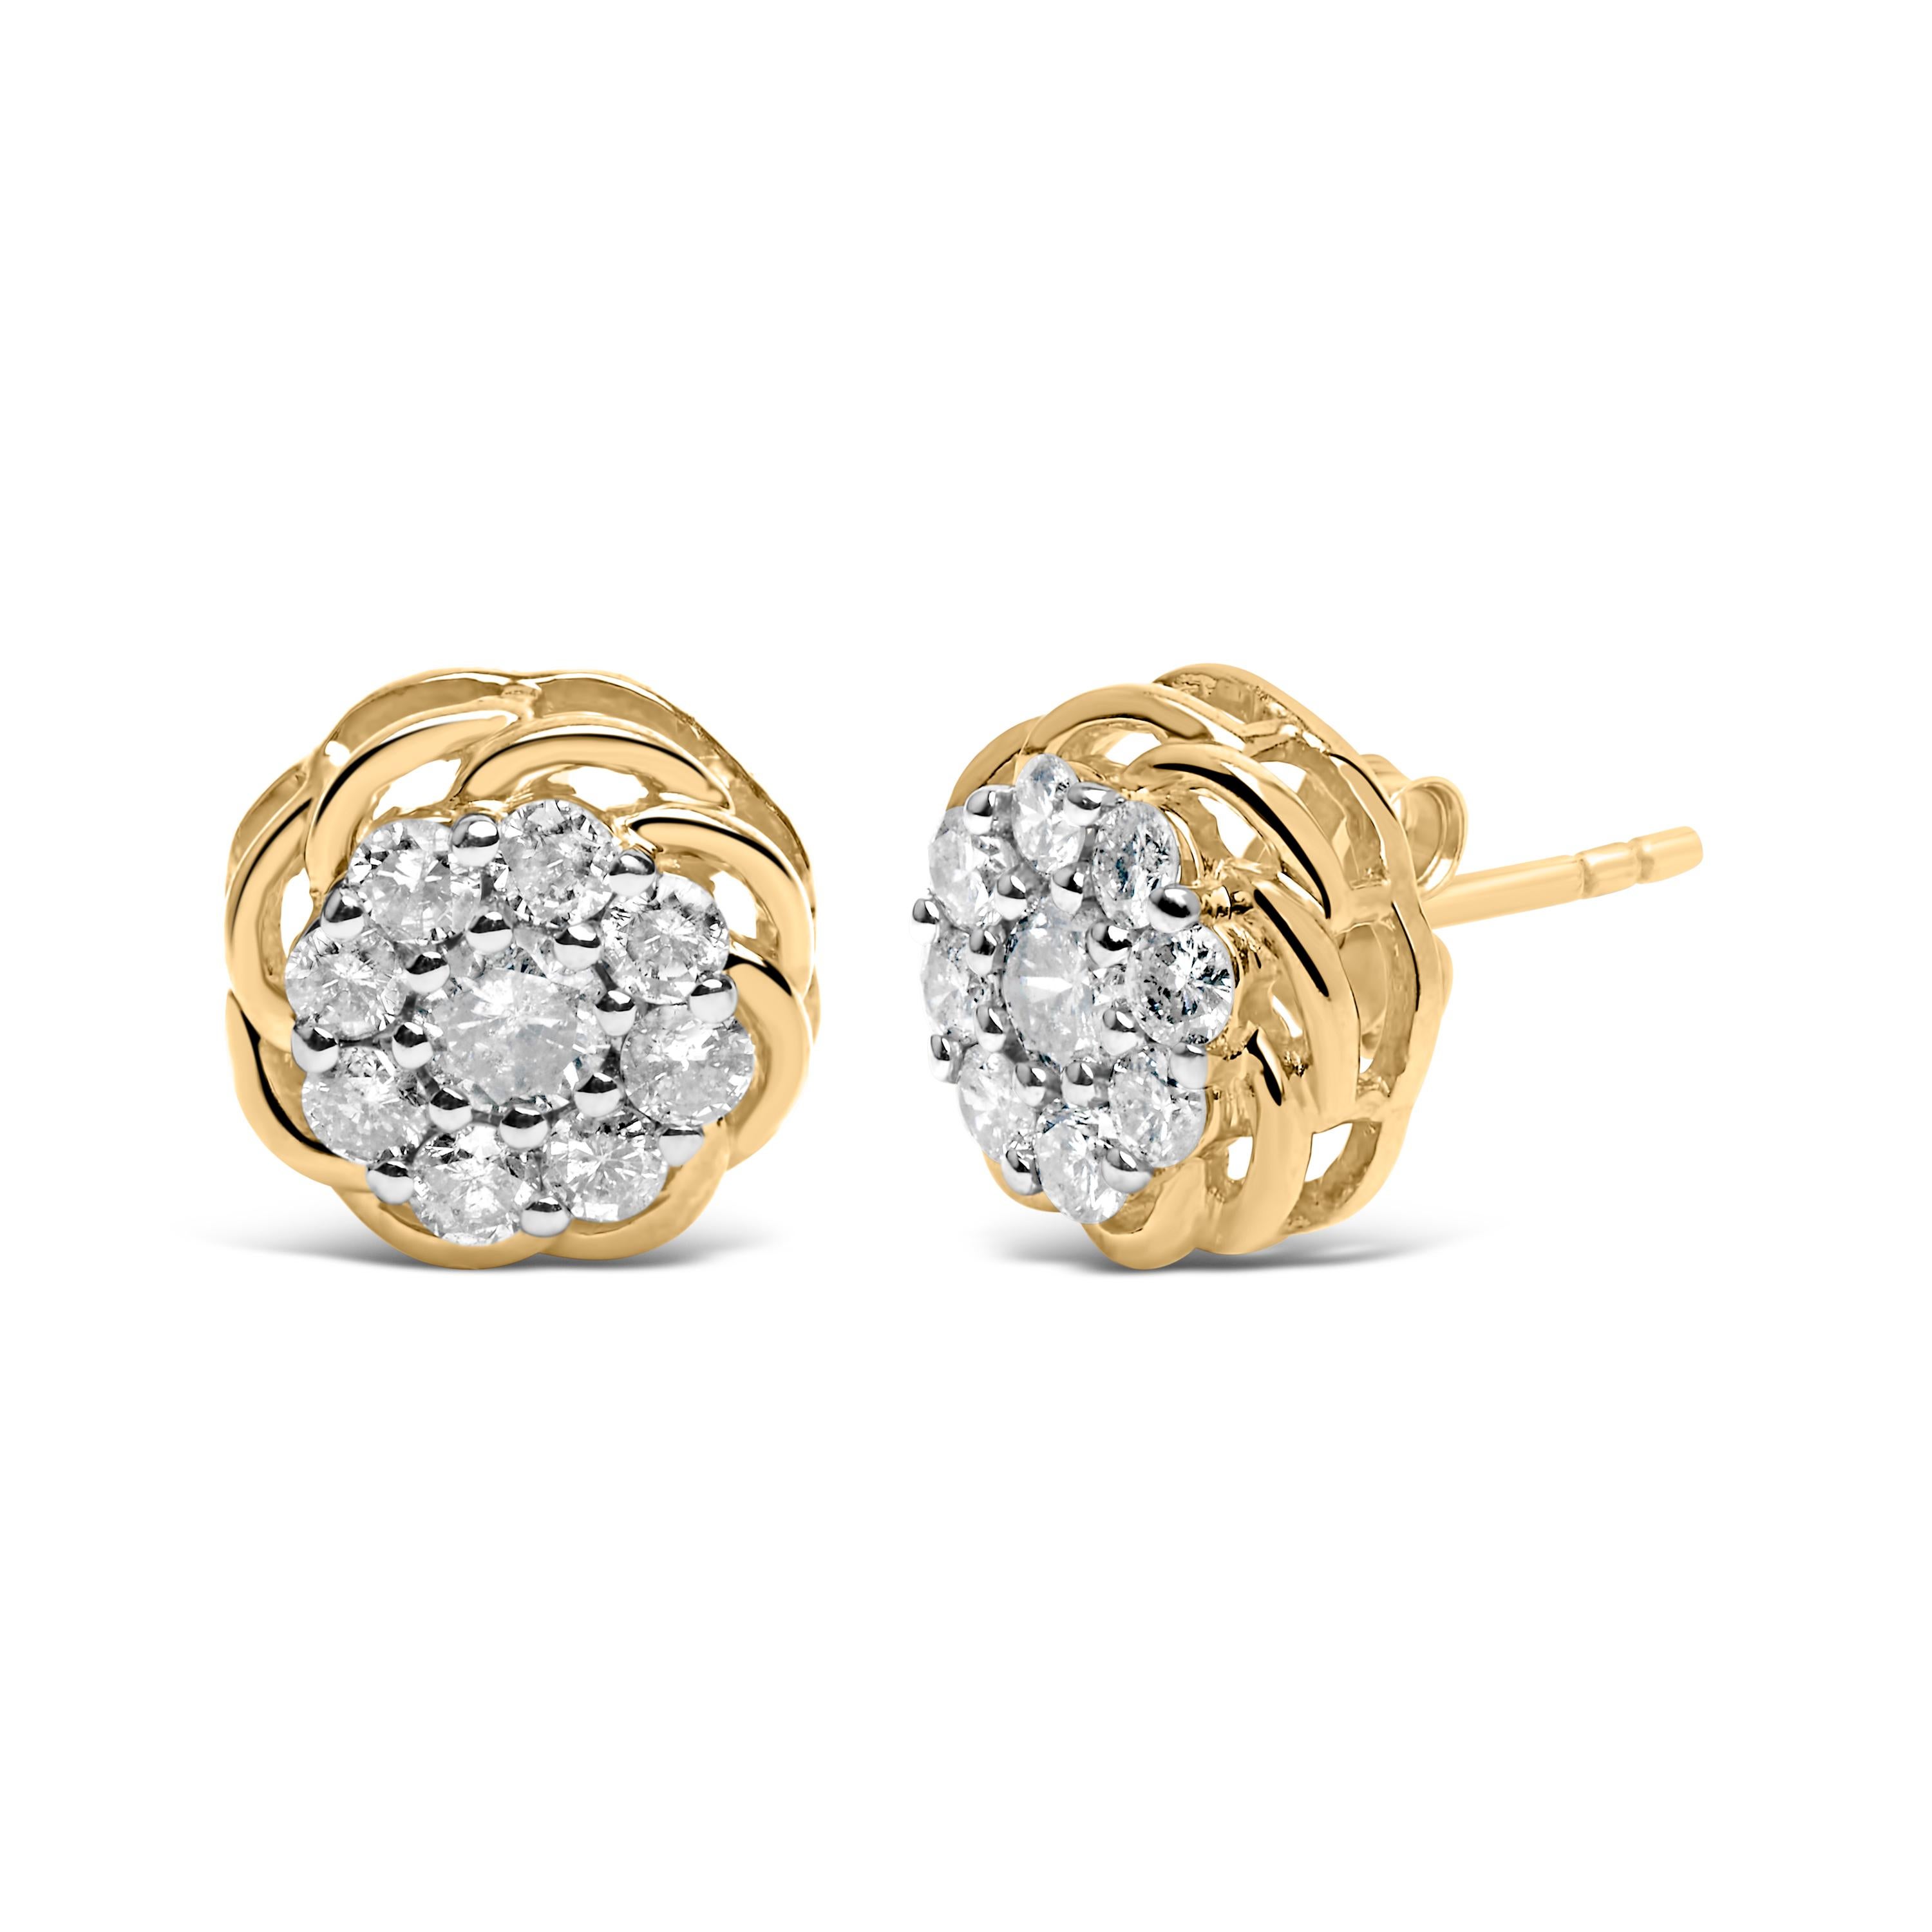 Introducing a dazzling masterpiece that will make you shine like a star! Crafted with utmost precision, these exquisite earrings are a true symbol of elegance and sophistication. Made with 10K yellow gold plated .925 sterling silver, they exude a